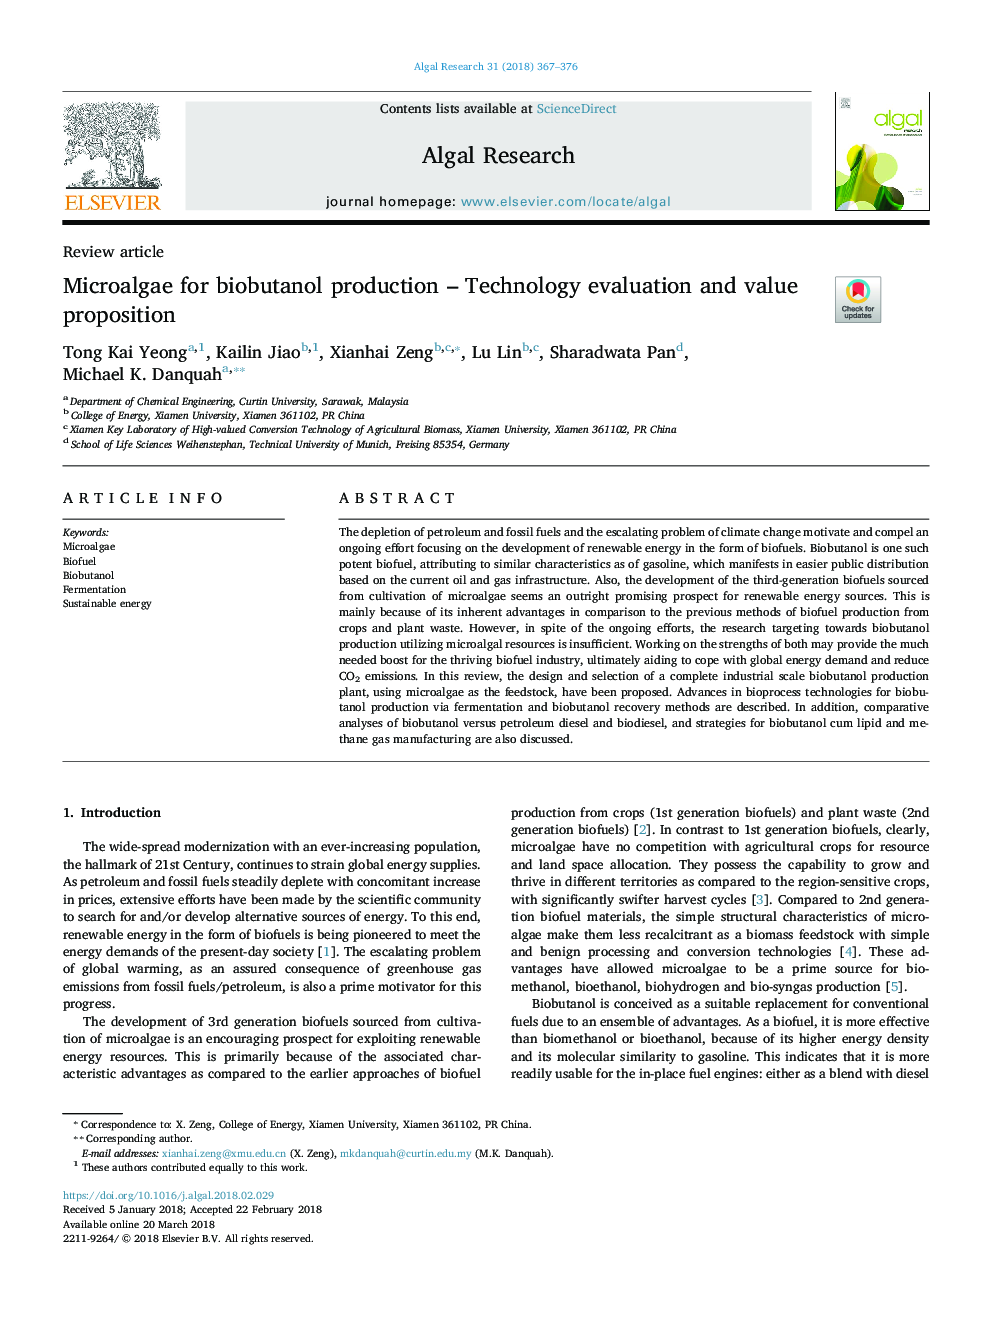 Microalgae for biobutanol production - Technology evaluation and value proposition